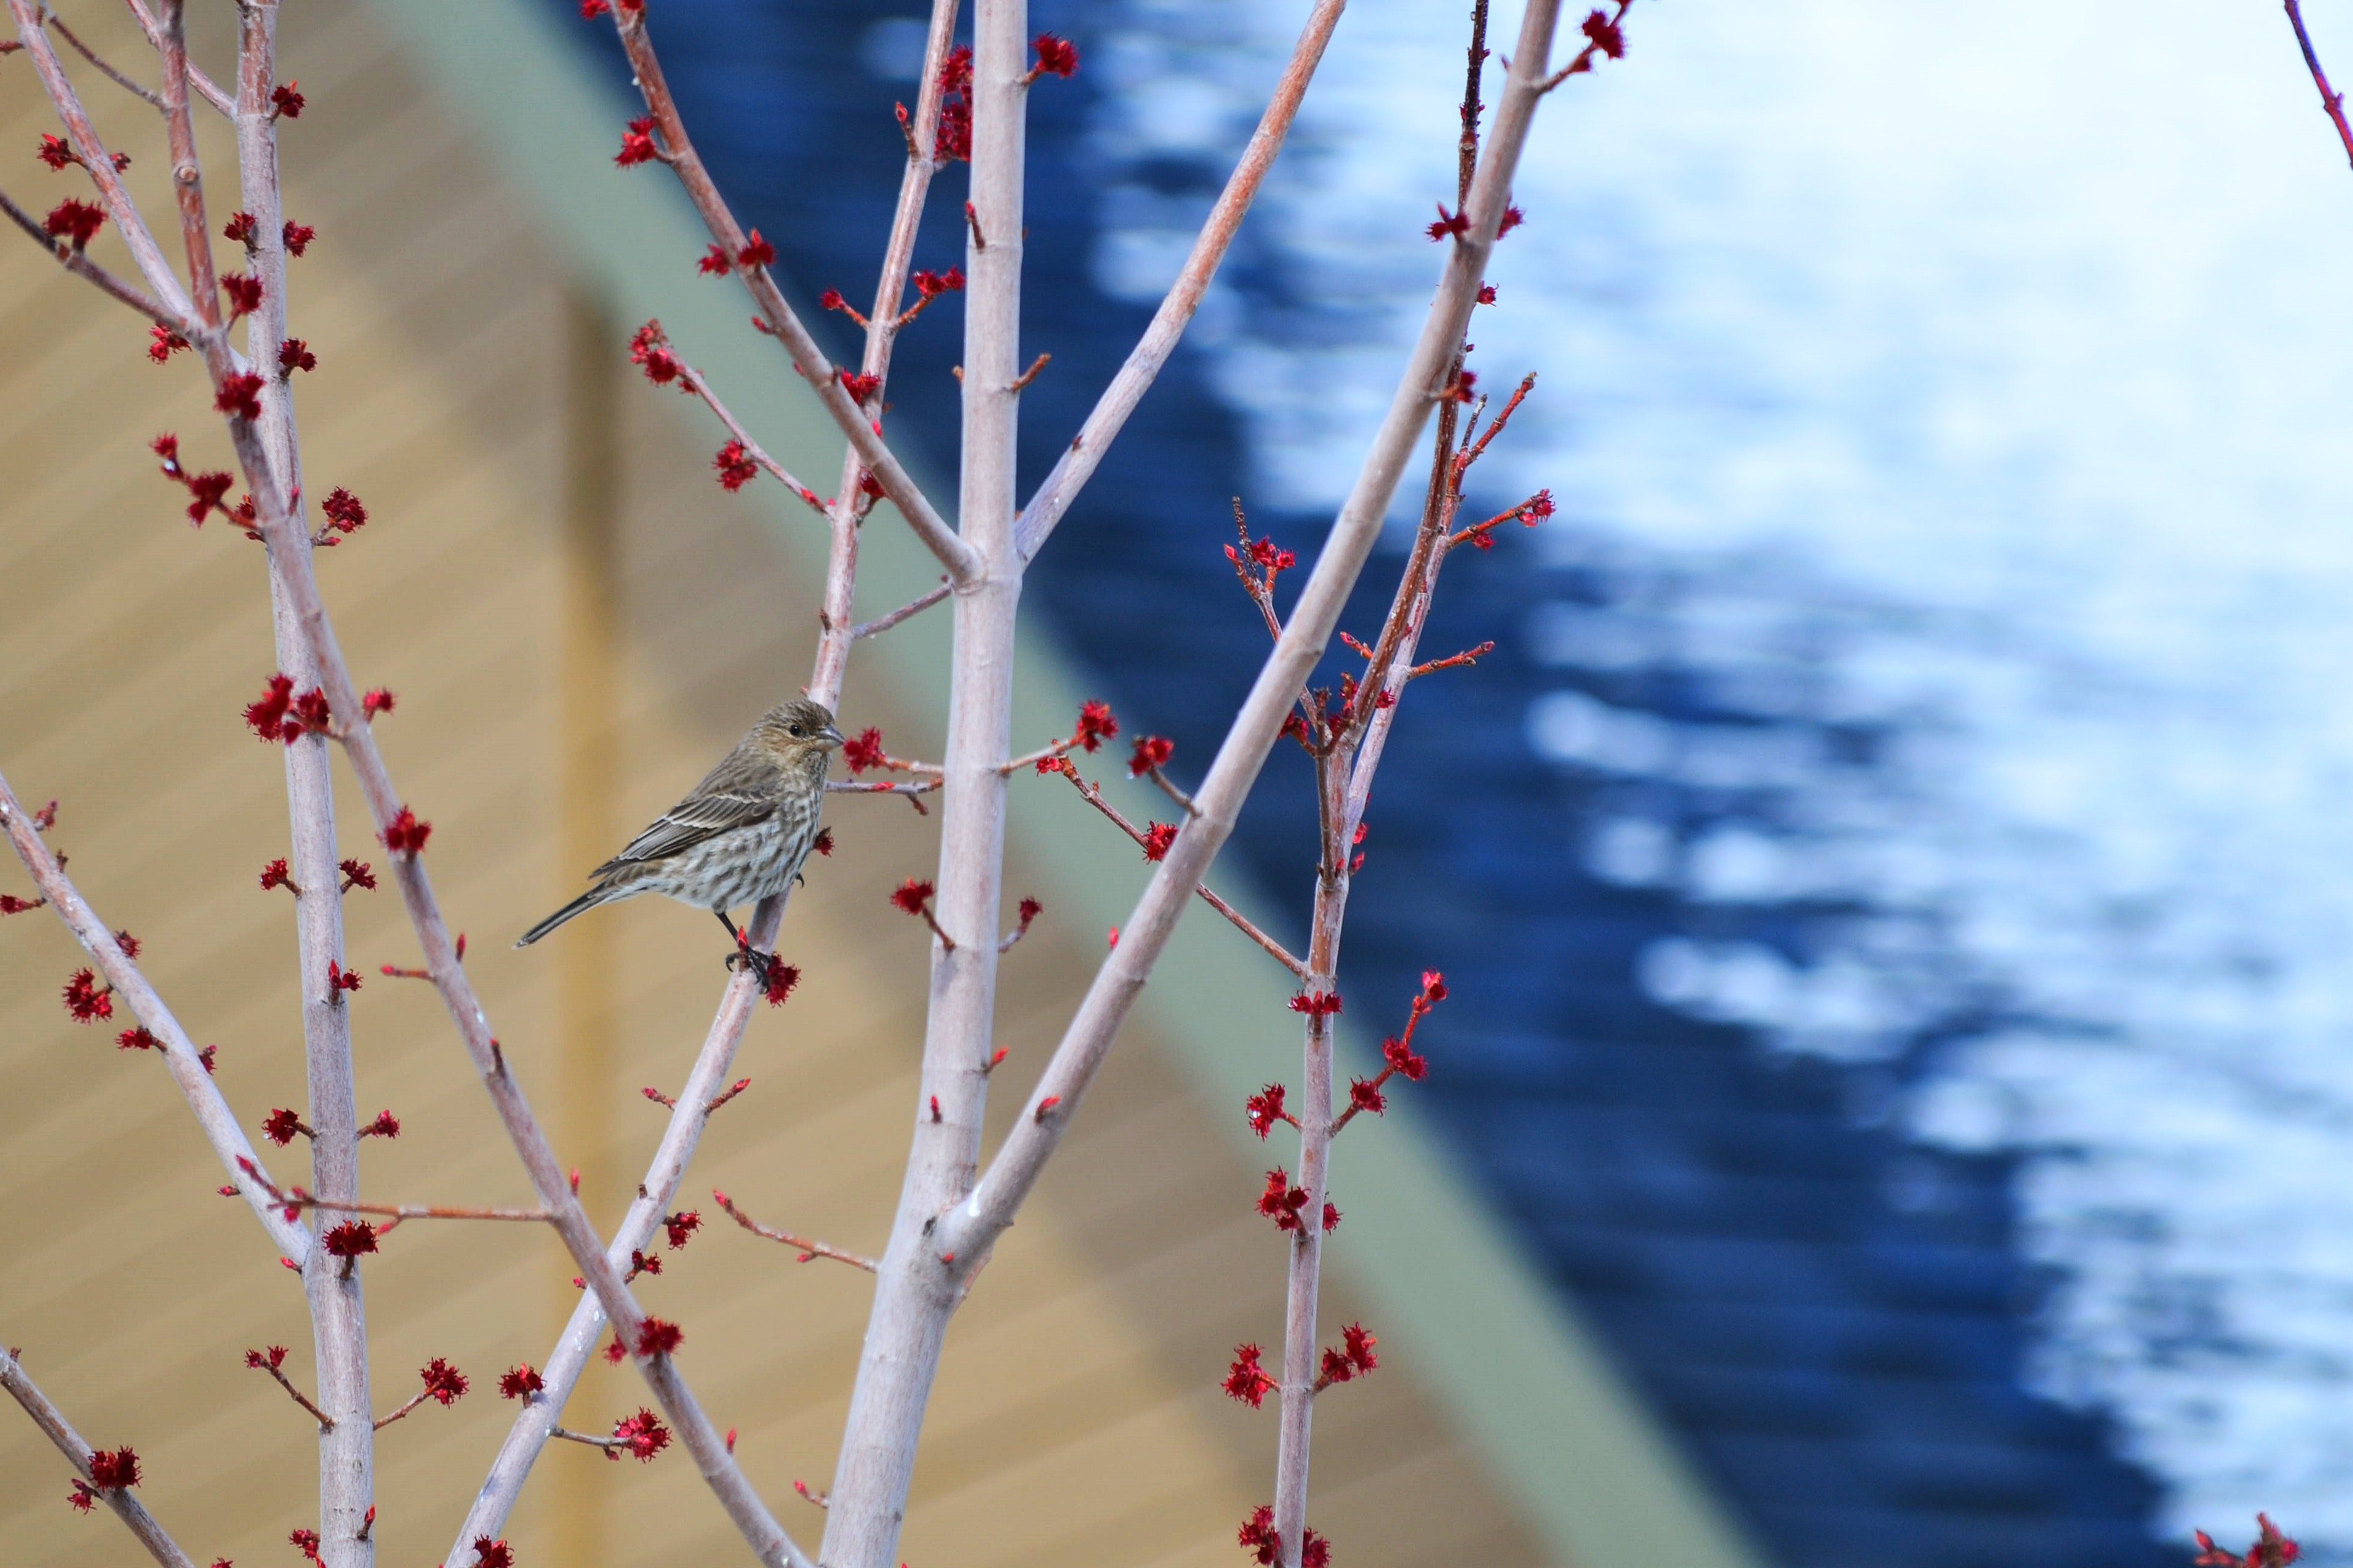 Little bird on a branch of a tree with red berries, Little bird on a branch of a tree with red berries